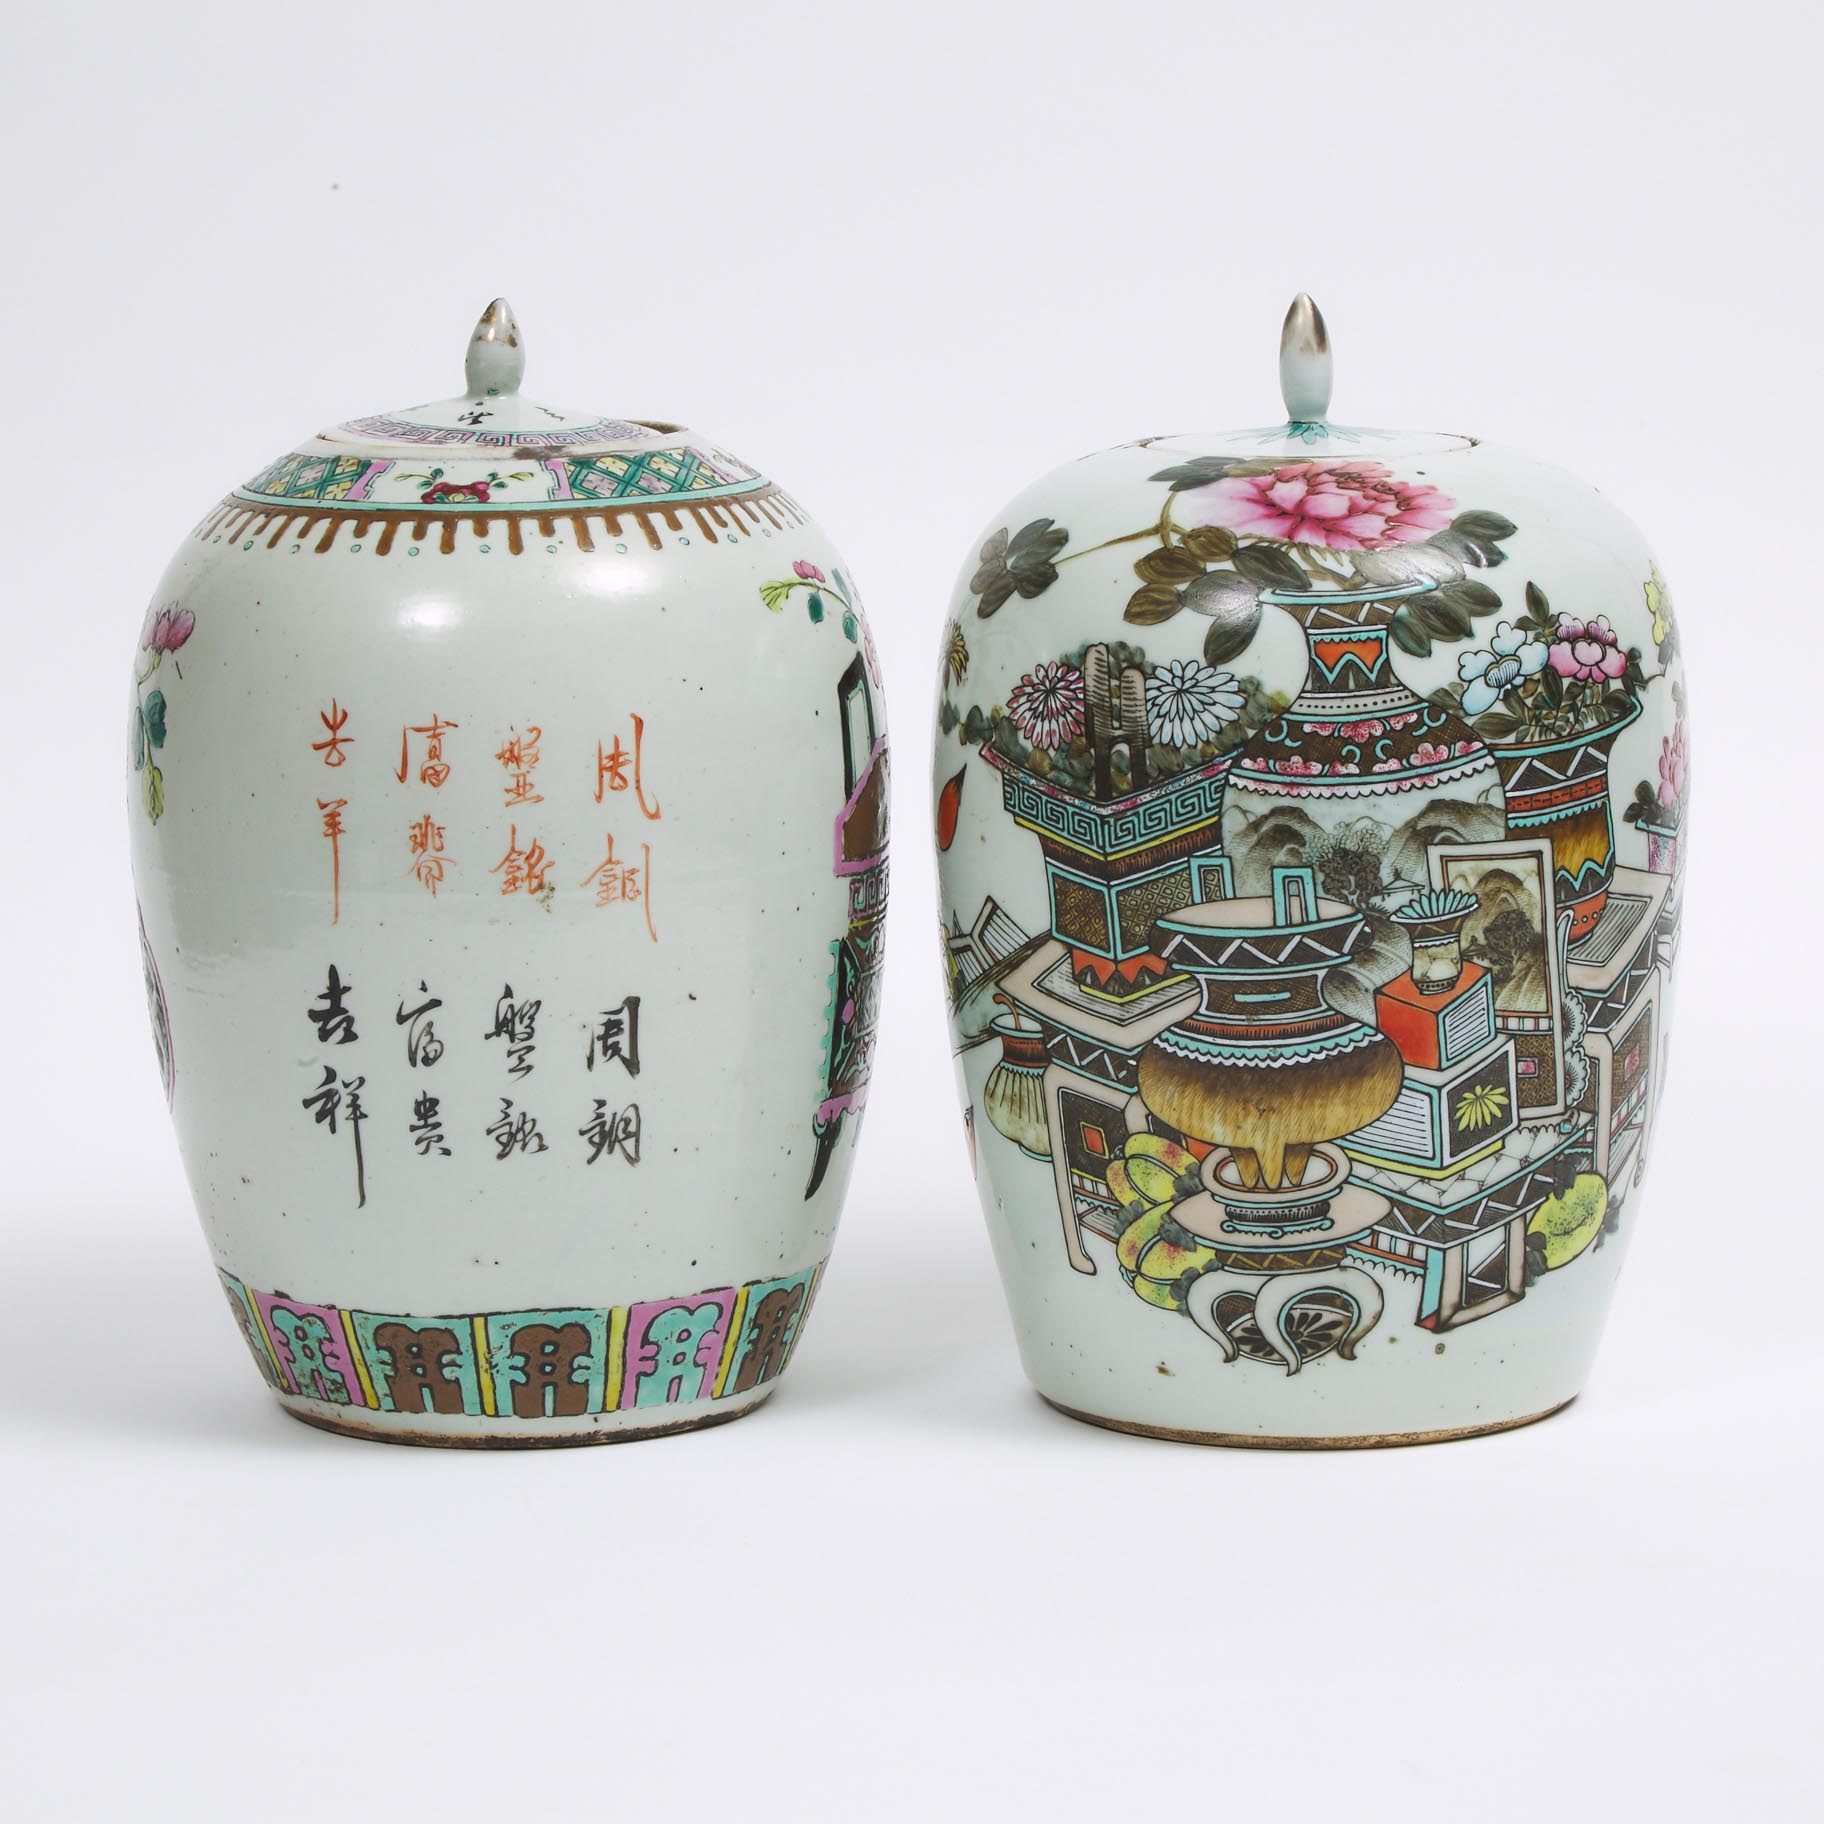 Two 'Hundred Antiques' Lidded Ginger Jars, Republican Period